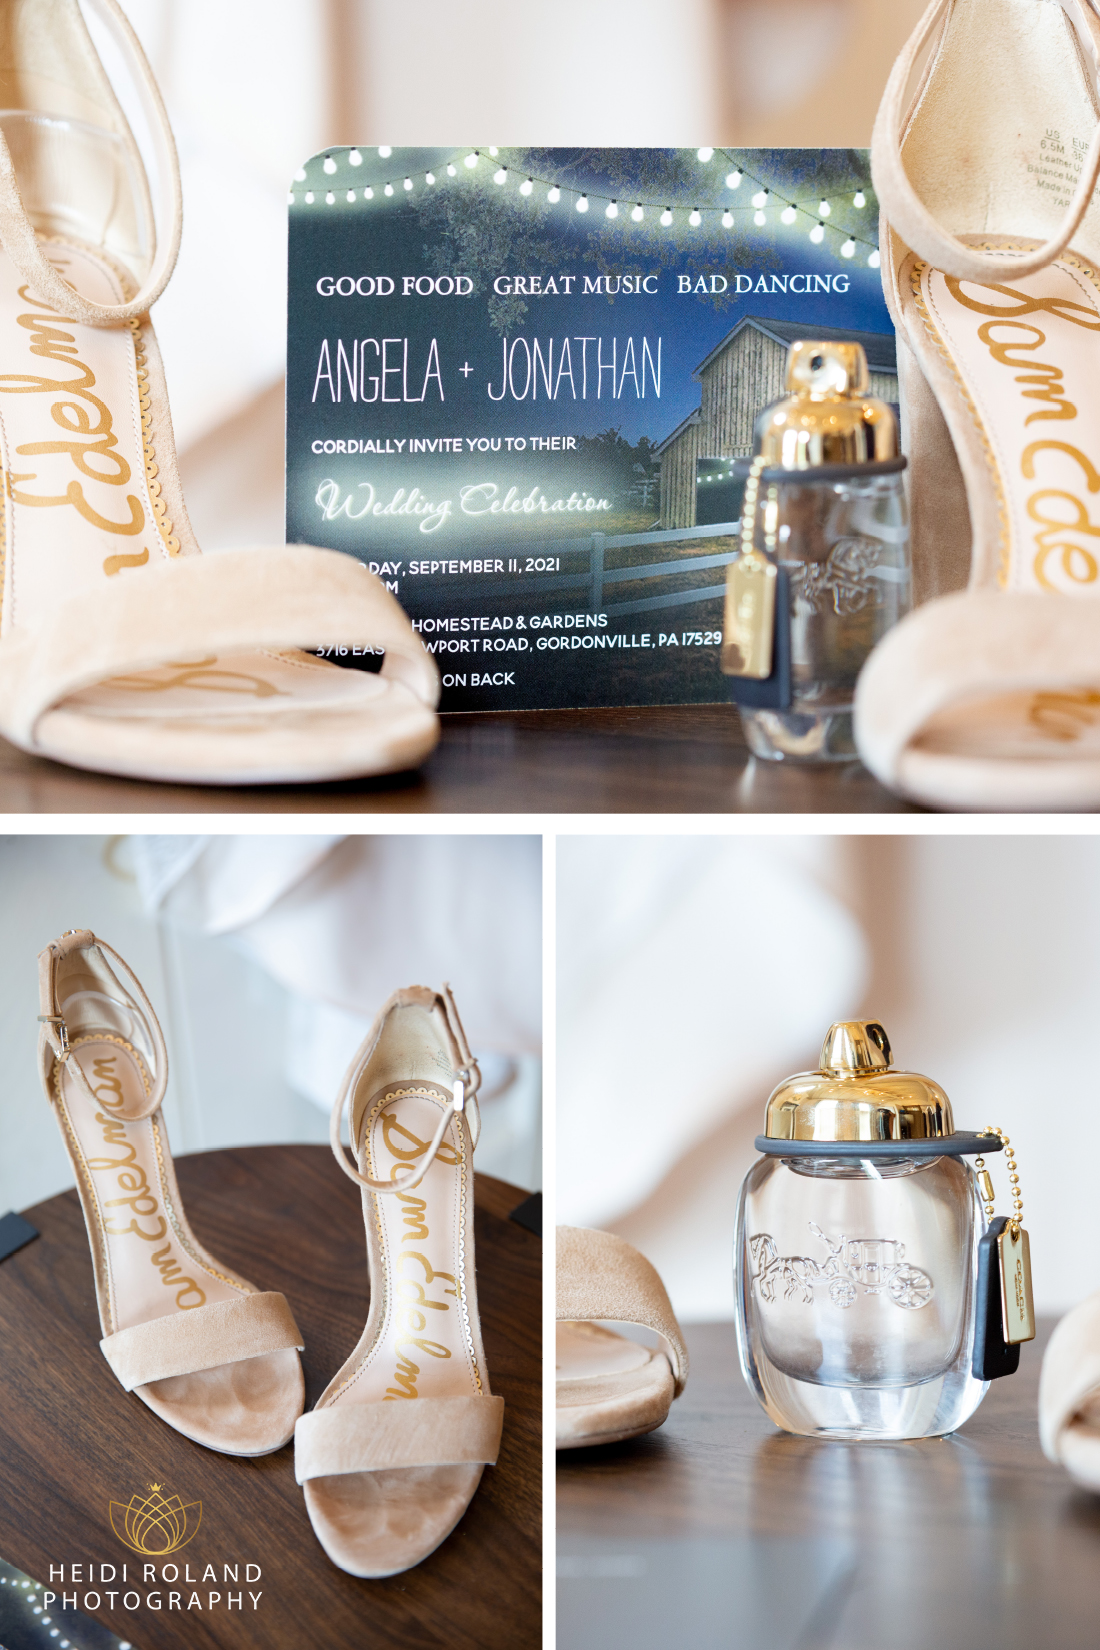 bridal details, shoes, perfume, invitation for barn wedding in PA